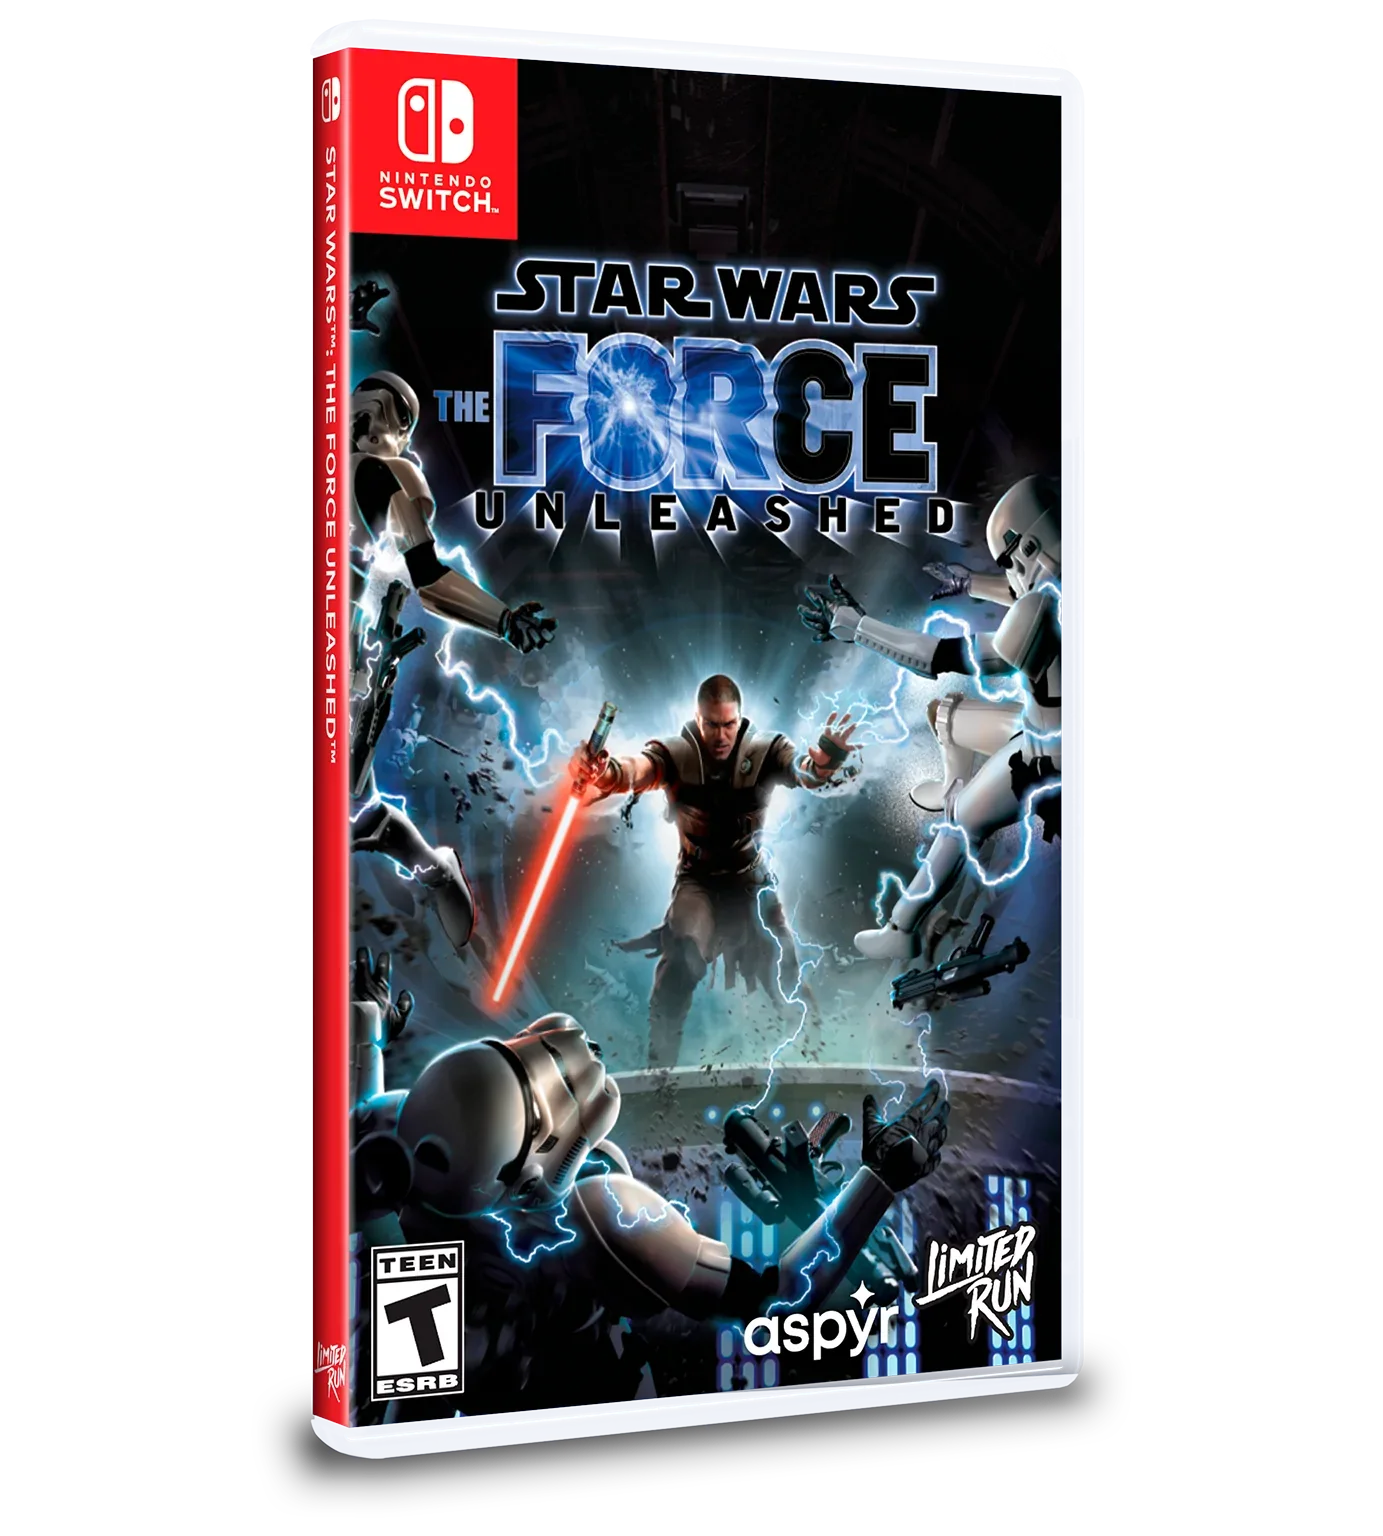 STAR WARS FORCE UNLEASHED [LIMITED RUN GAMES #146] - SWITCH